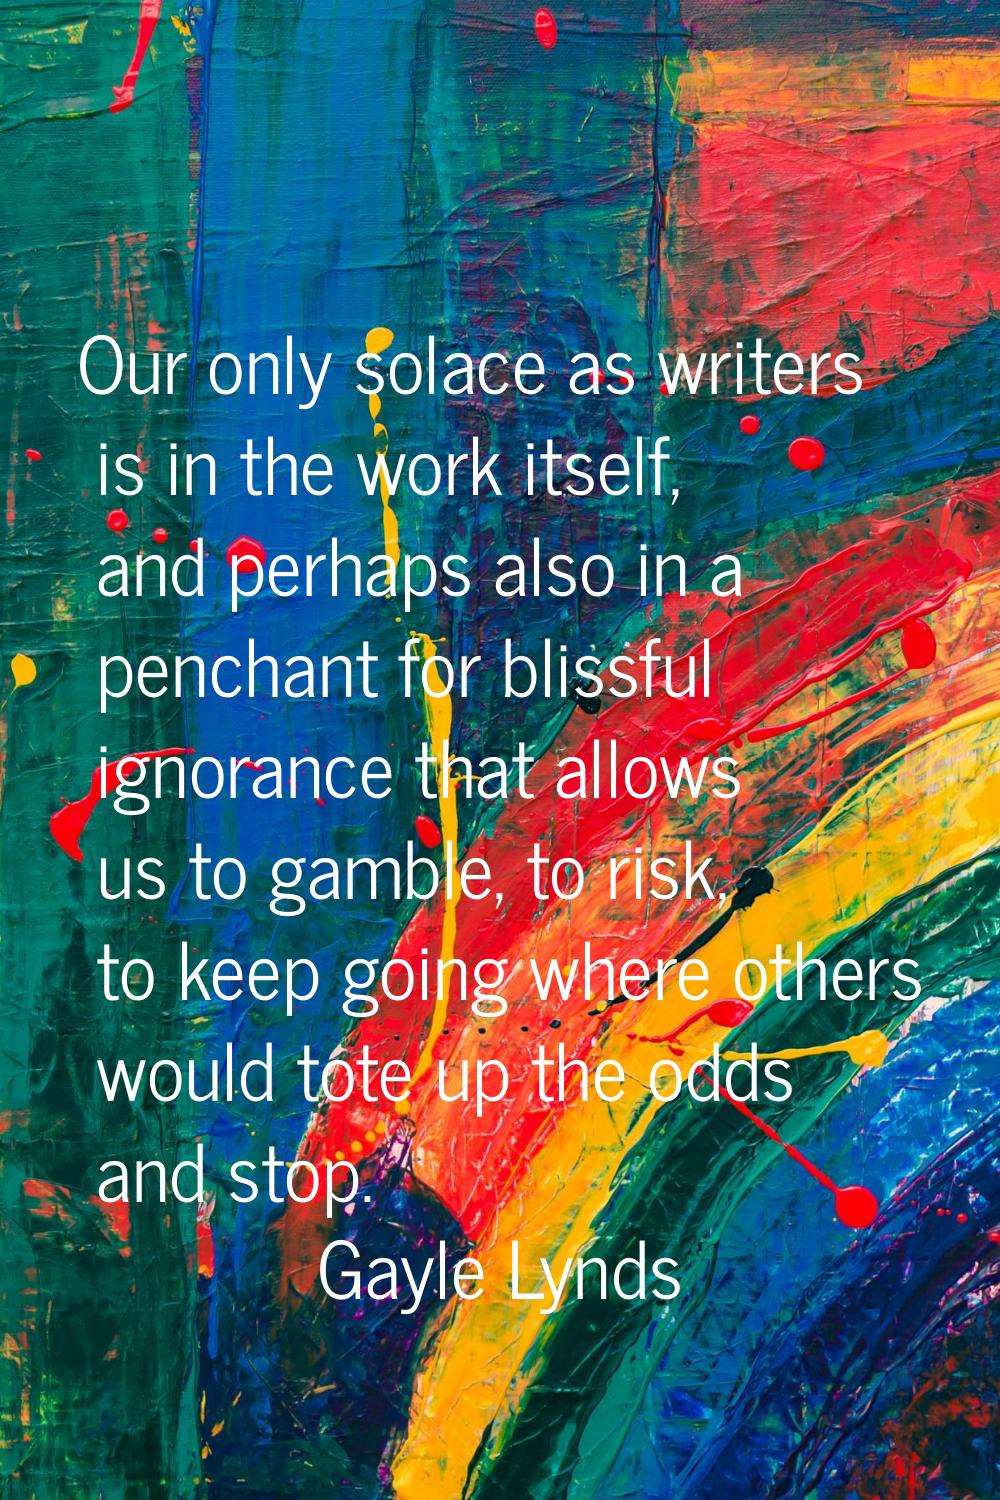 Our only solace as writers is in the work itself, and perhaps also in a penchant for blissful ignor